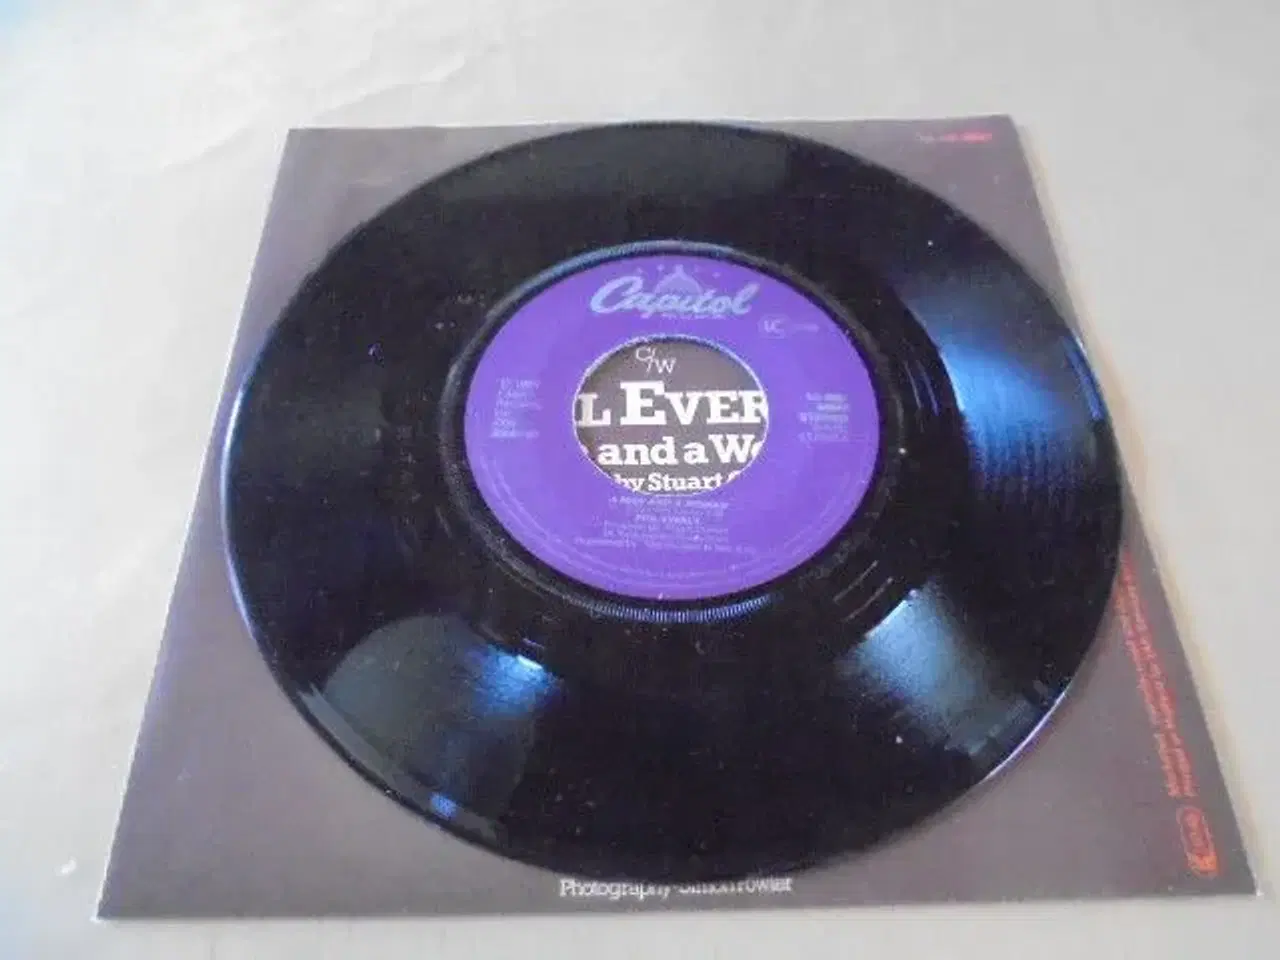 Billede 3 - Single: Phil Everly & Cliff Richard - fin stand  